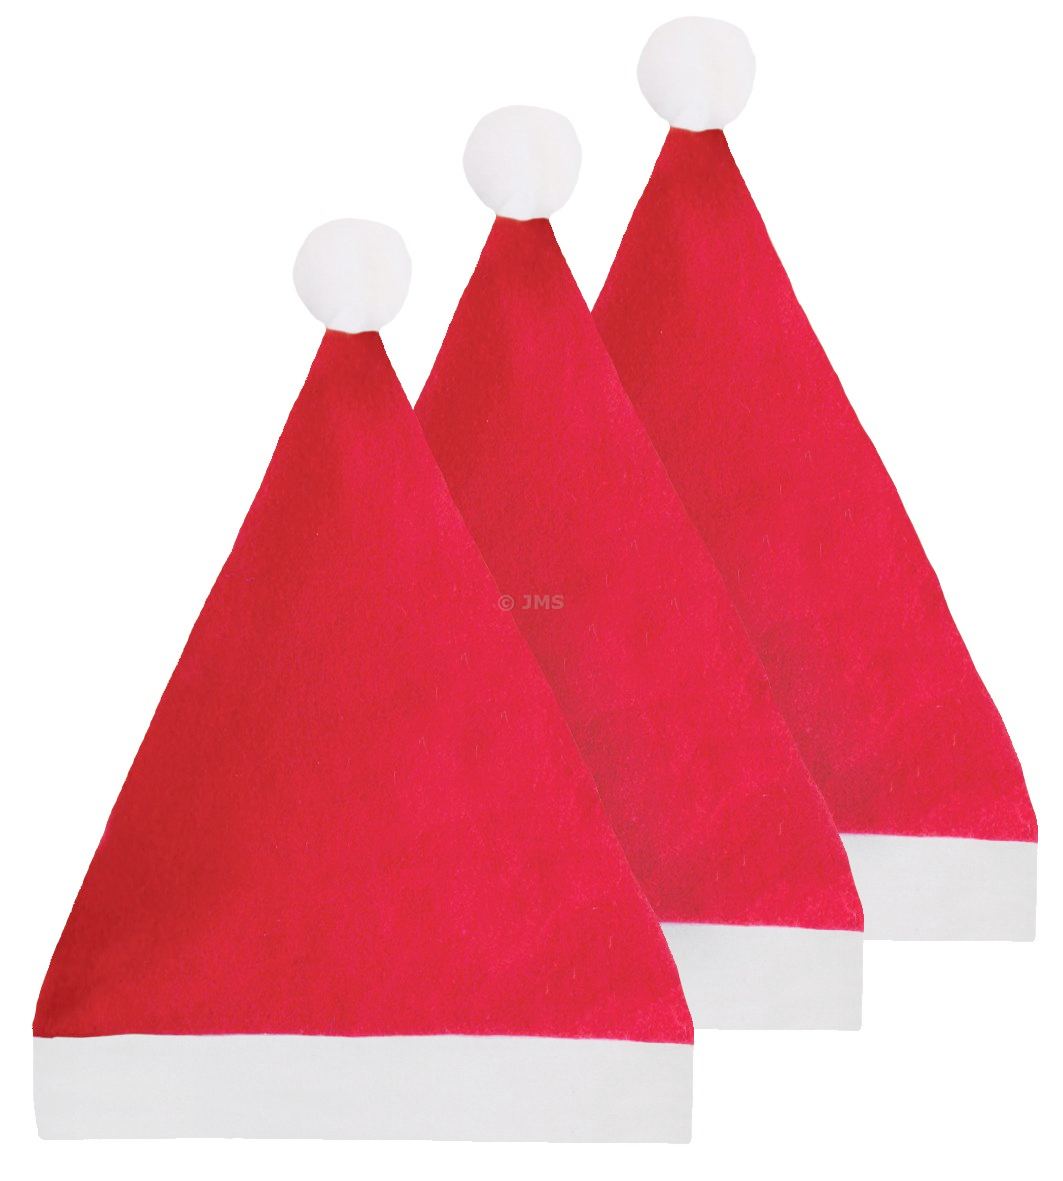 Pack of 3 Christmas Santa Hat Unisex Adult Felt Father Cap Xmas Office Fun Party Events Fancy Costume Accessories 